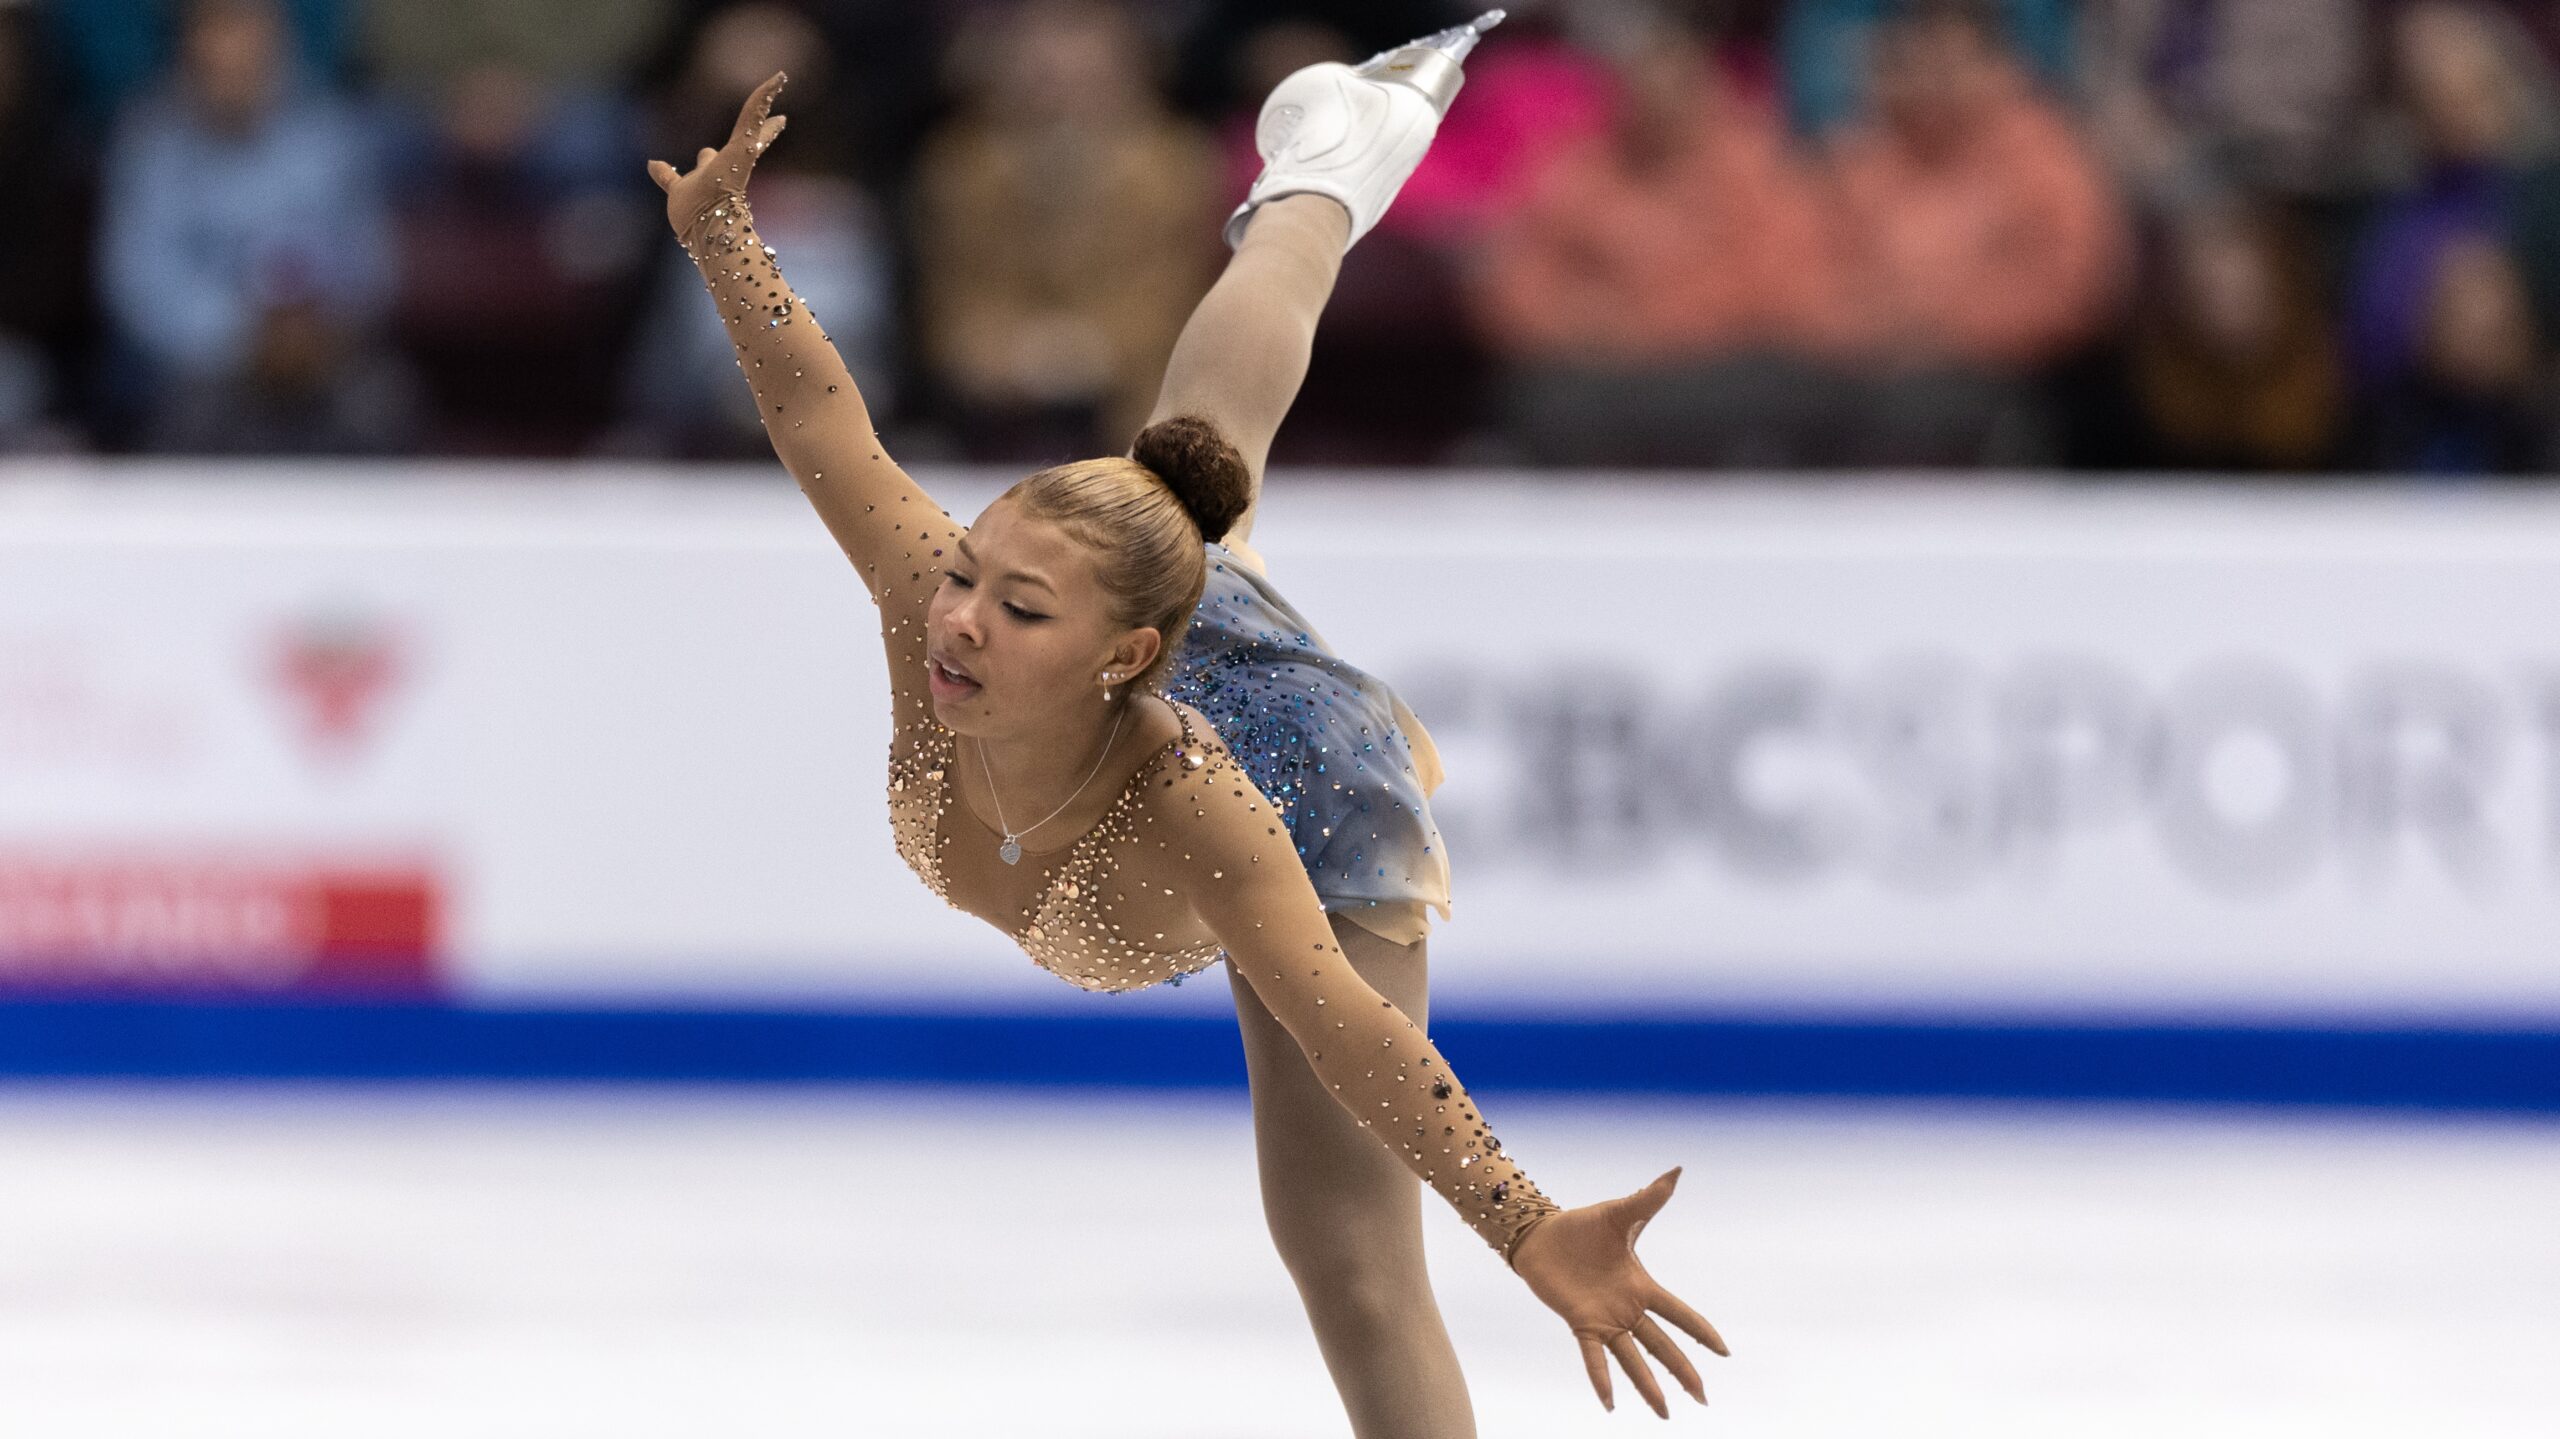 Starr Andrews Makes History As First U.S. Black Figure Skater To Win Grand Prix Medal